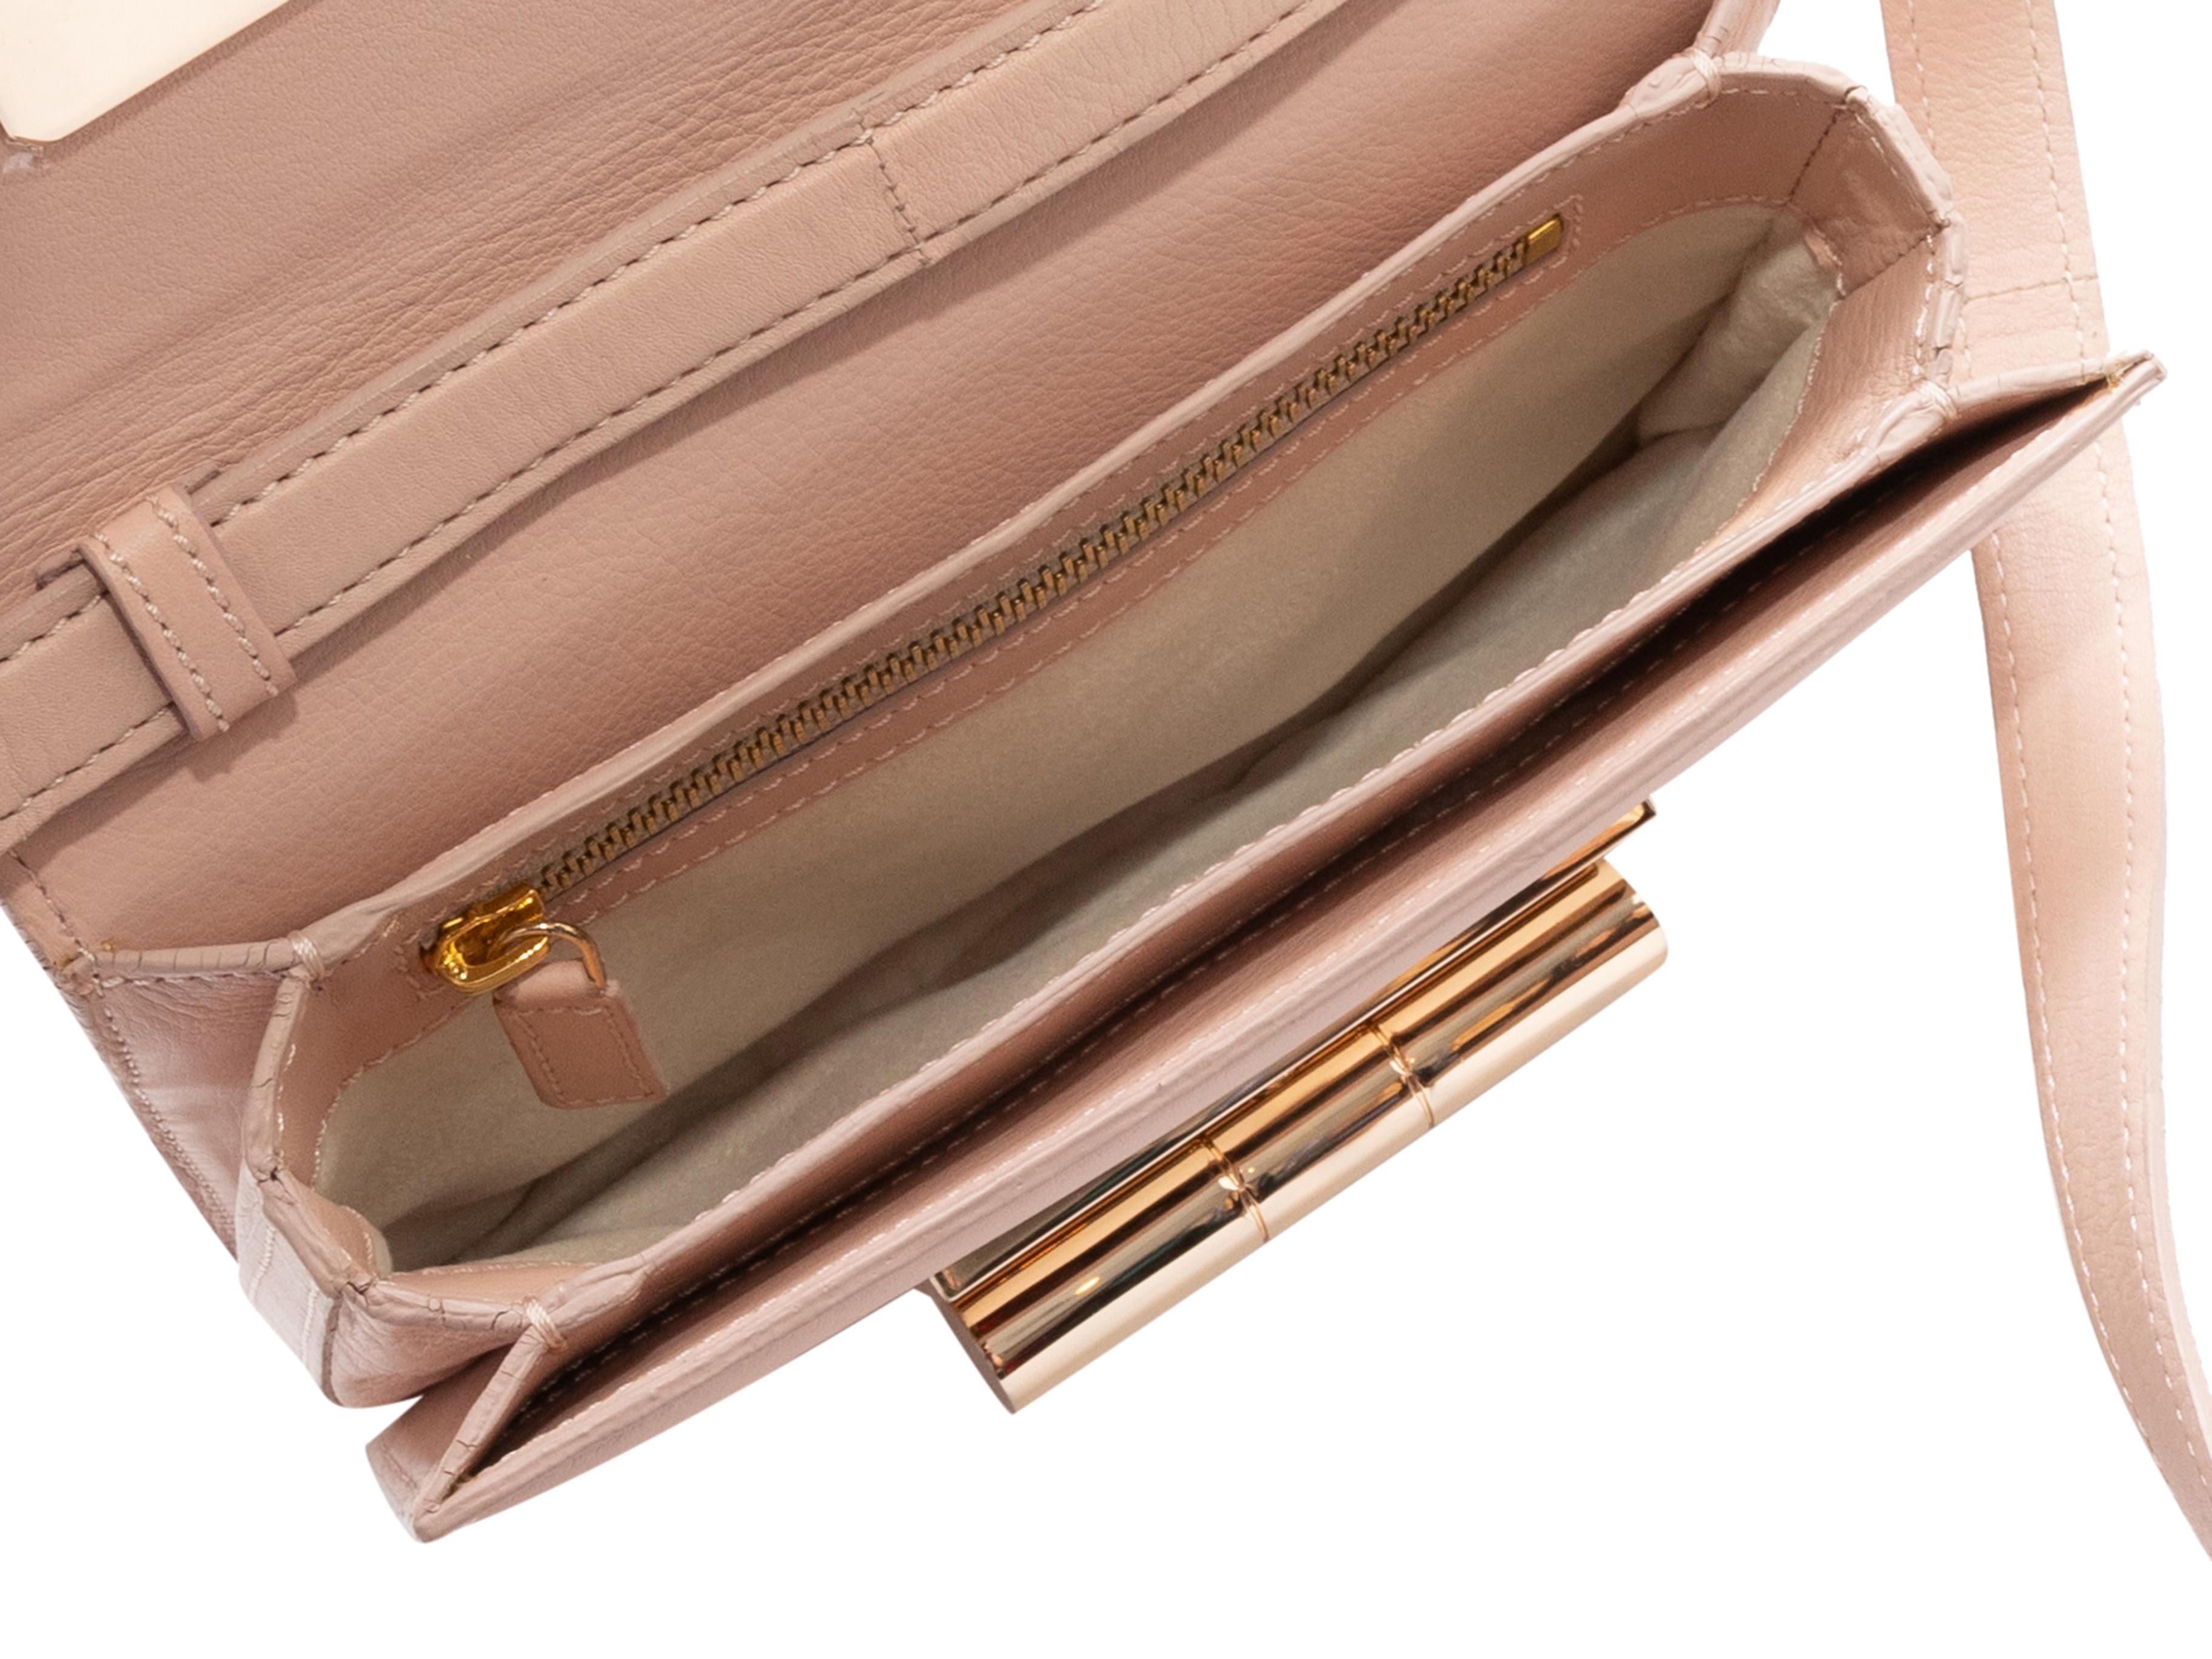 Blush Tom Ford Natalia Crossbody Bag. The Natalia Crossbody Bag features a leather body, gold-tone hardware, a single flat crossbody strap, and an oversized front turn-lock closure. 8.2